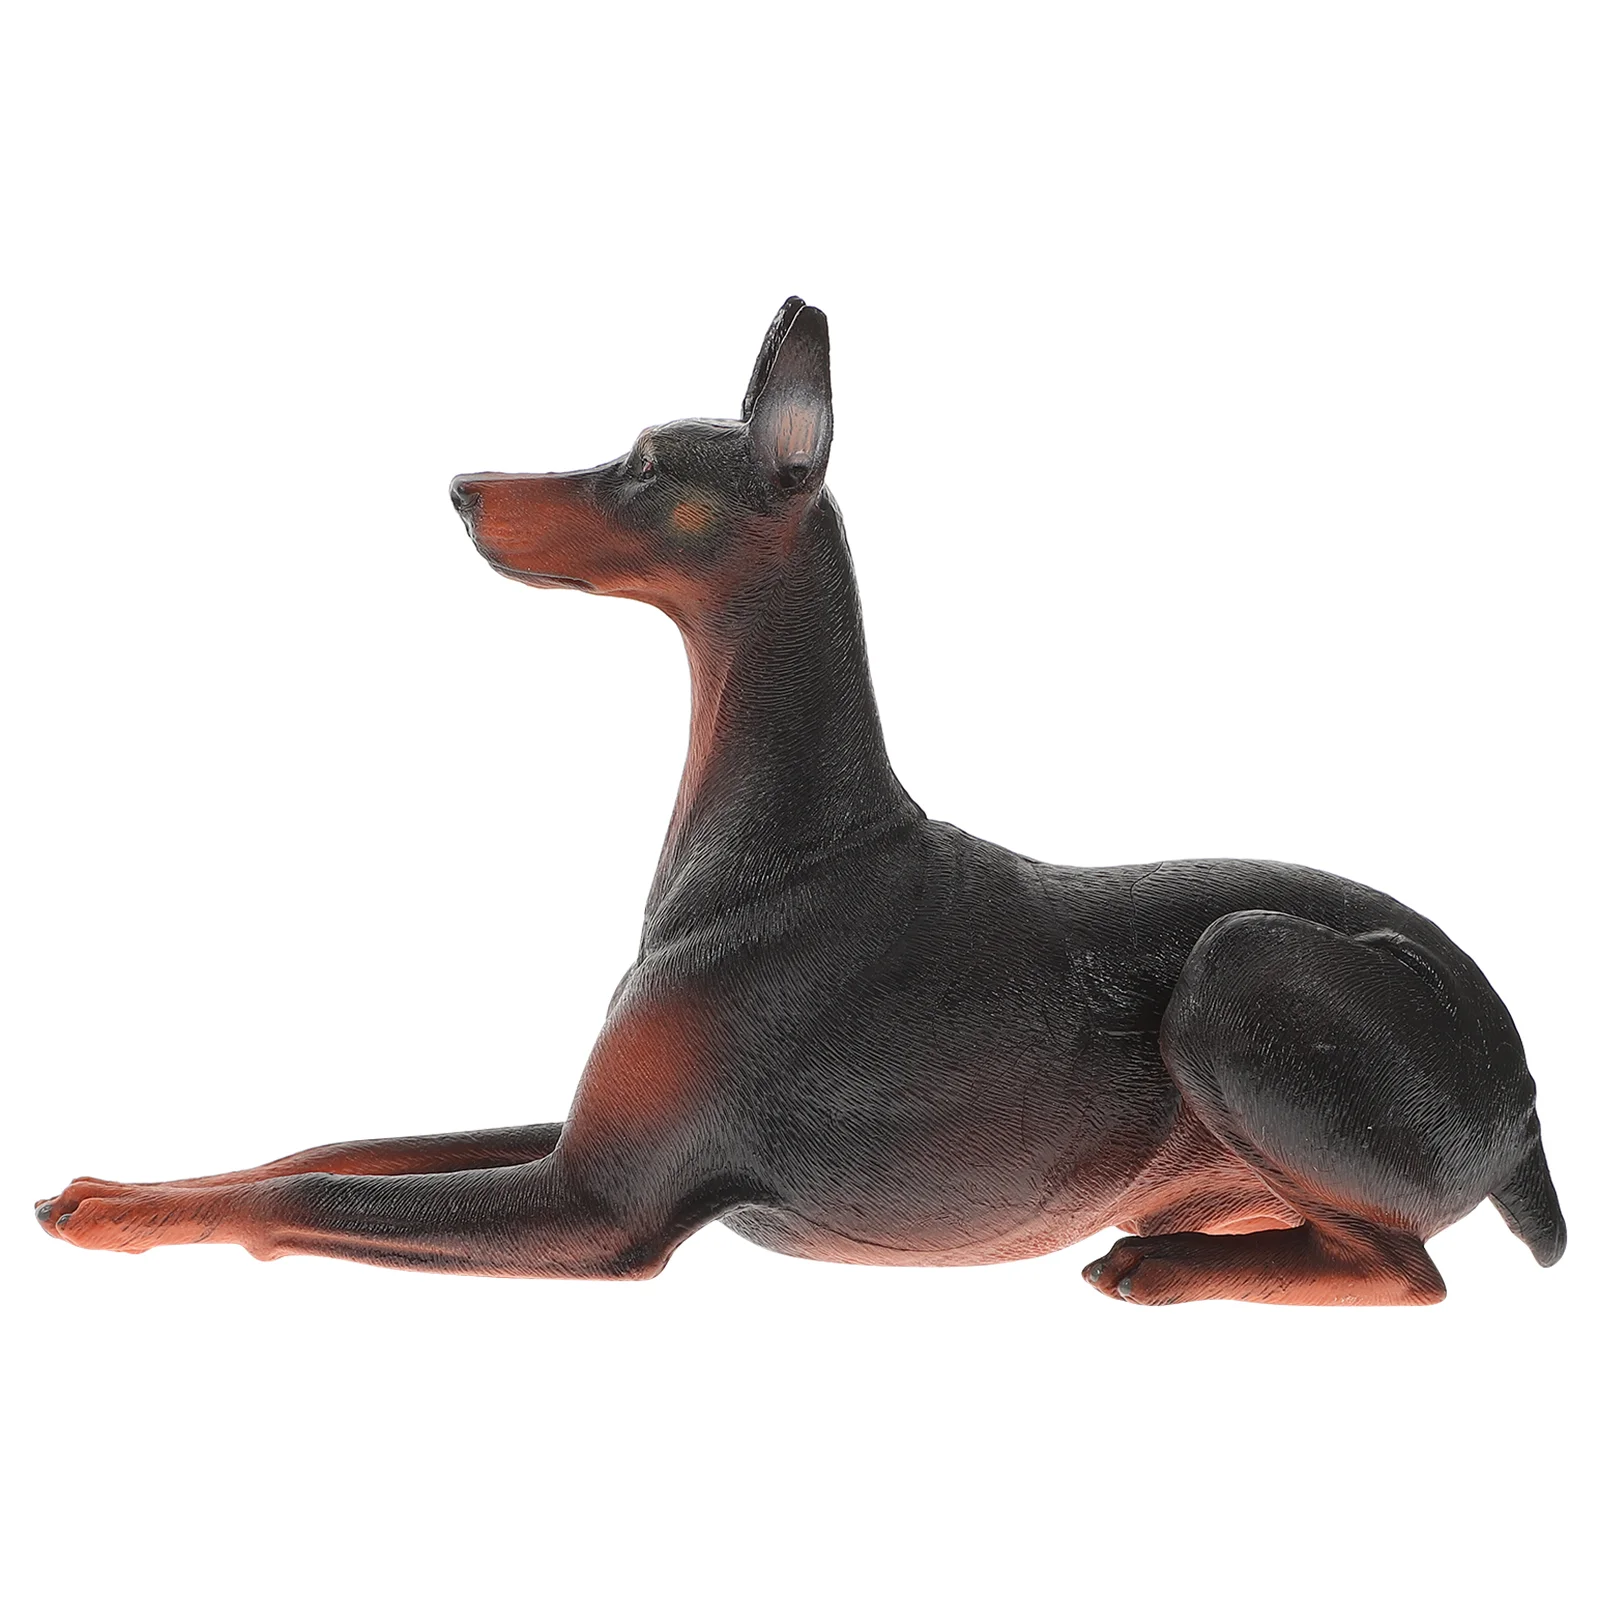 

Dog Doberman Figurine Statue Retriever Educational Accents Sitting Figure Table Toy Puppy Toys Sitter Sculpture Figurines Animal